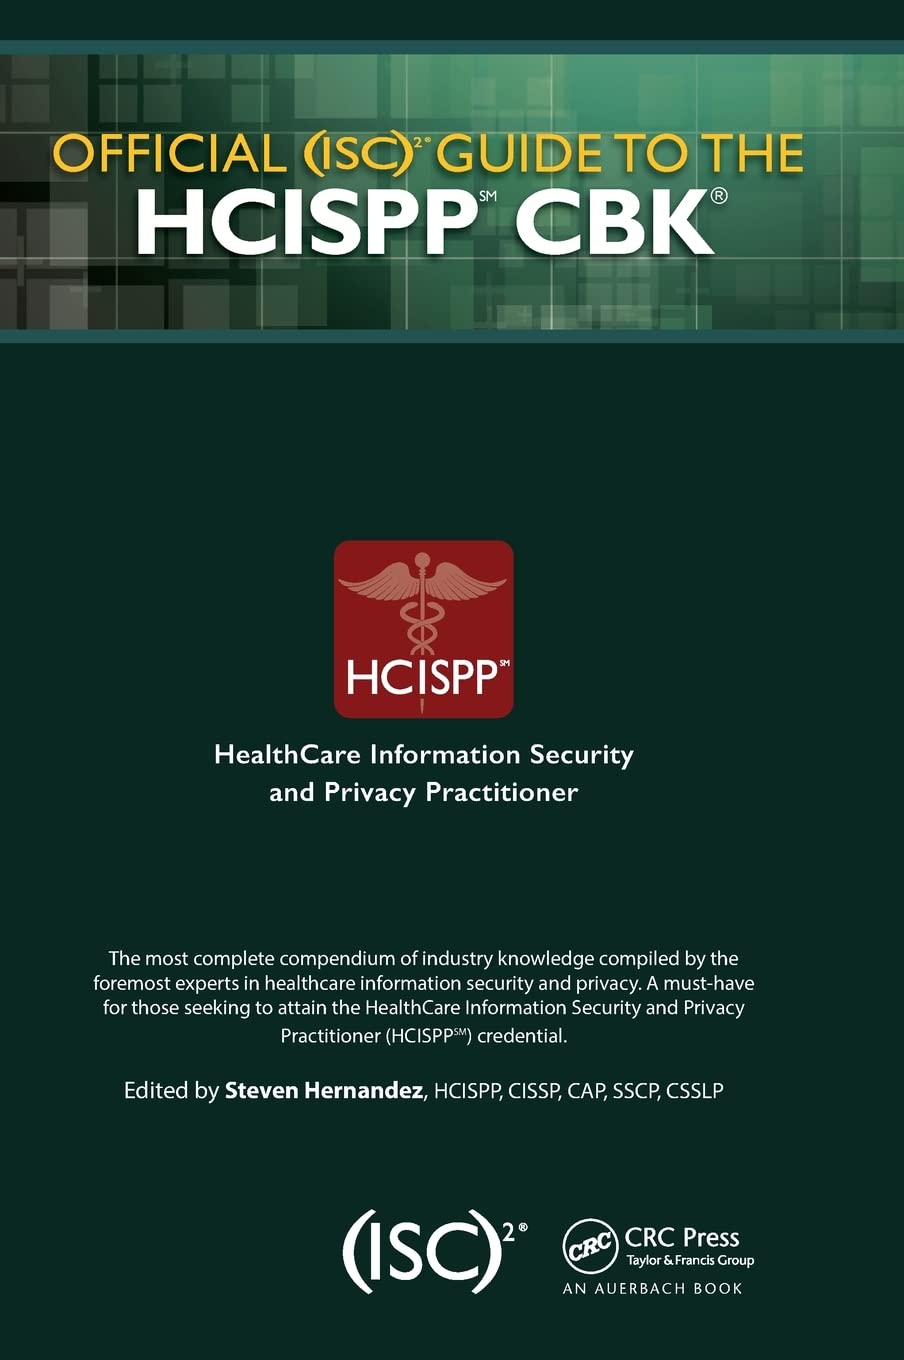 Official (ISC)2 Guide to the HCISPP CBK ((ISC)2 Press)